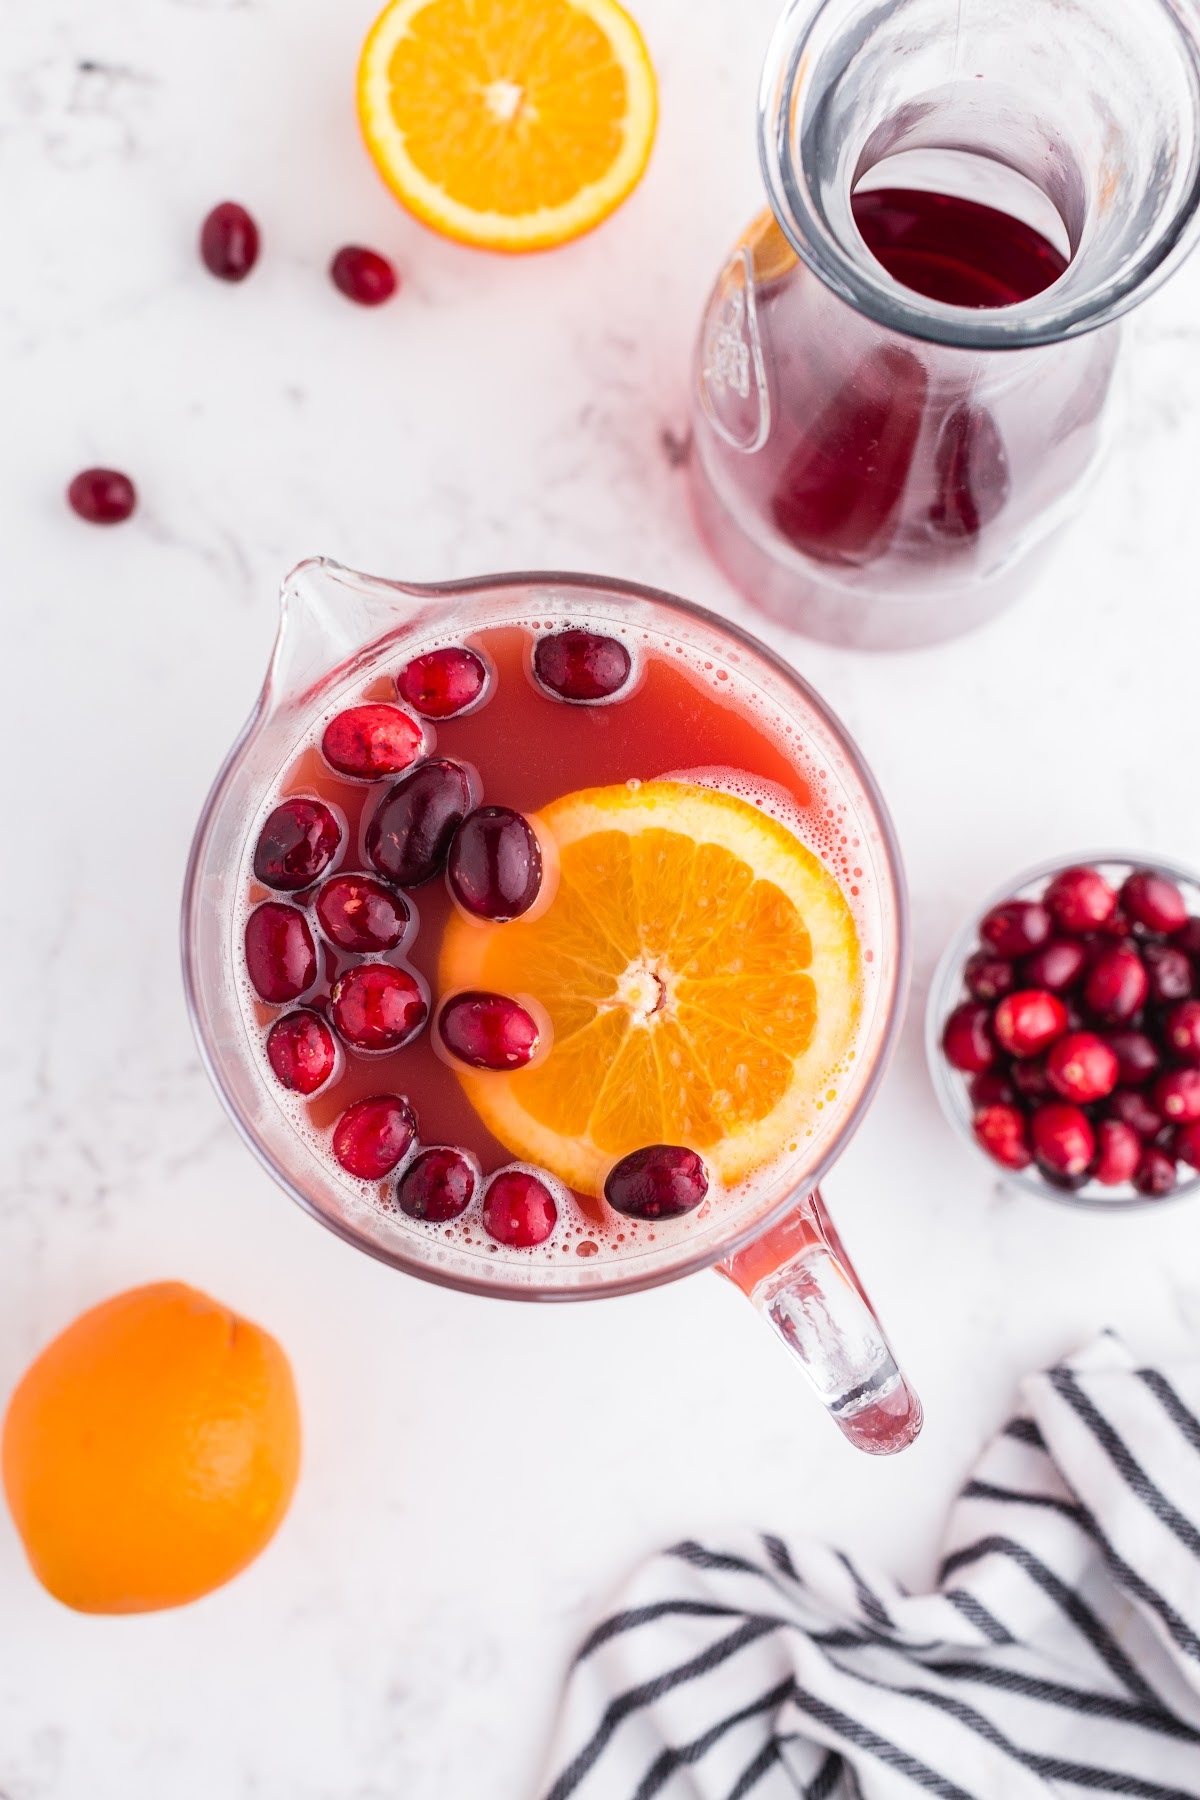 Pitcher of Christmas punch garnished with orange slices and whole cranberries, carafe with cranberry juice nearby.